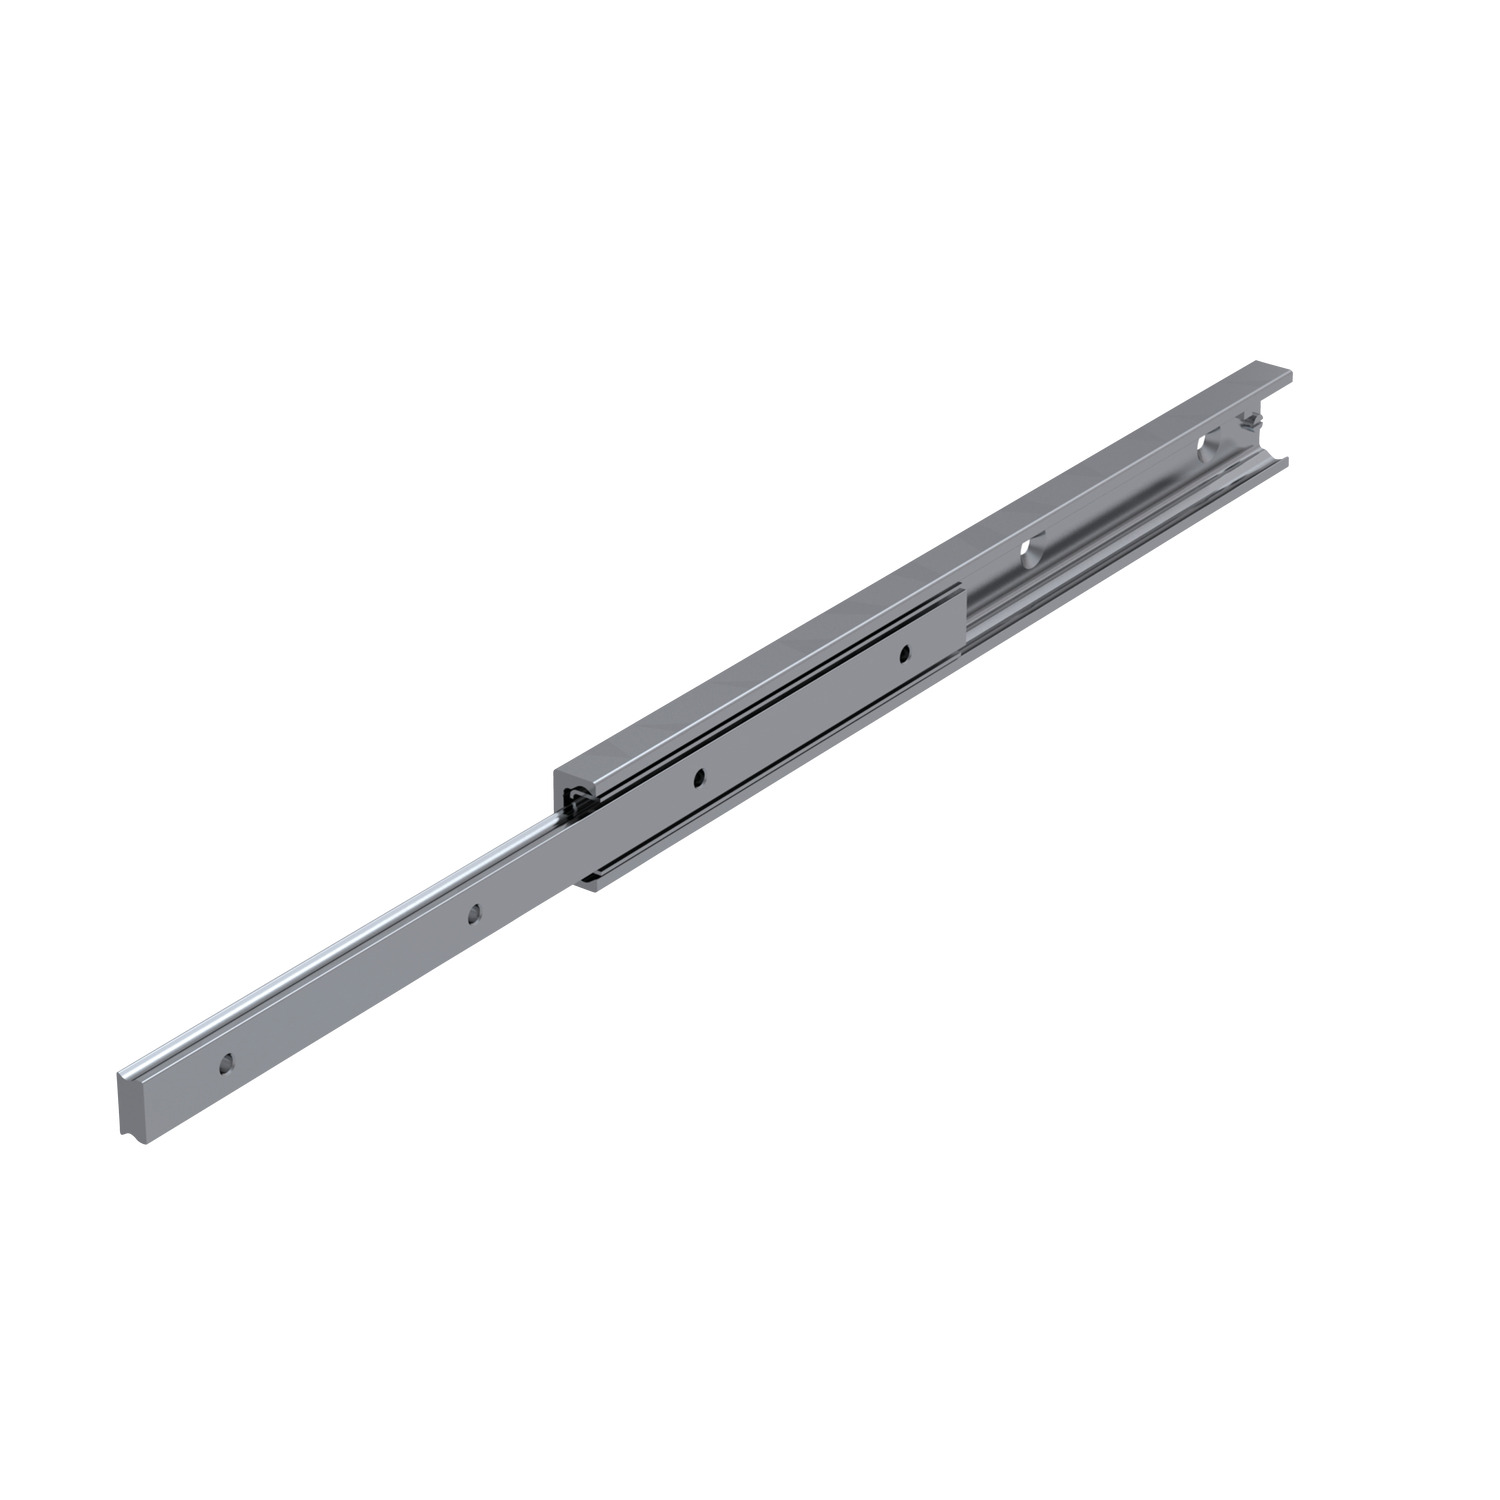 Partially Telescopic Slides Semi-telescopic rails with high load capacitities.